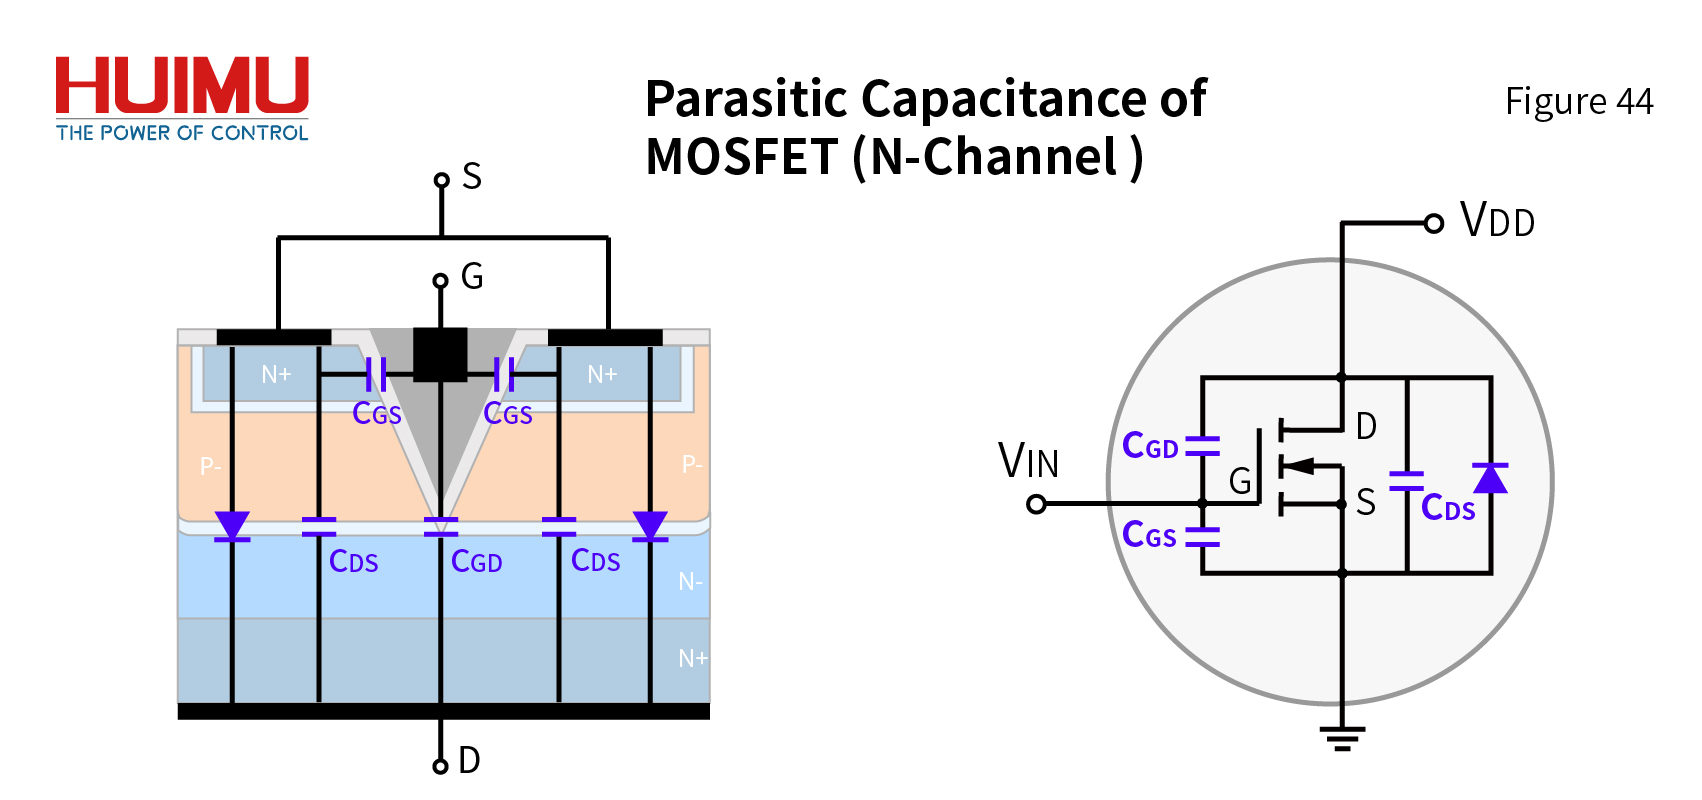 Parasitic Capacitance of MOSFET(N-Channel)